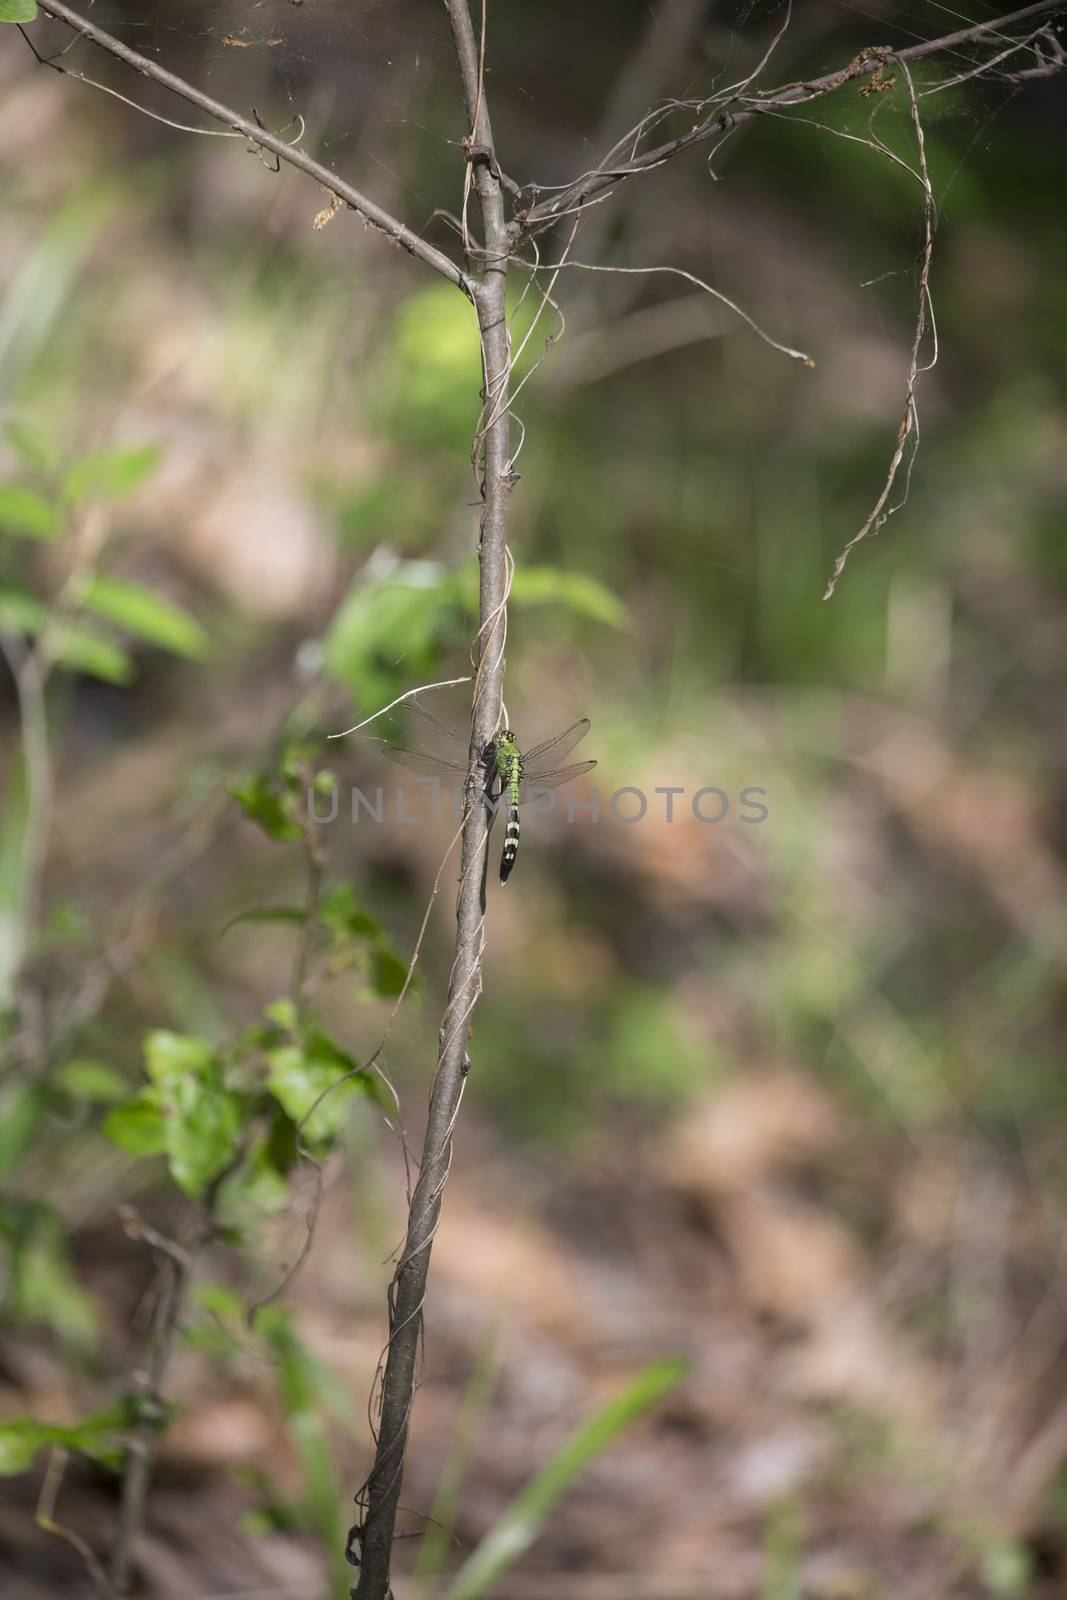 Eastern pondhawk dragonfly perched on a small, leafless tree